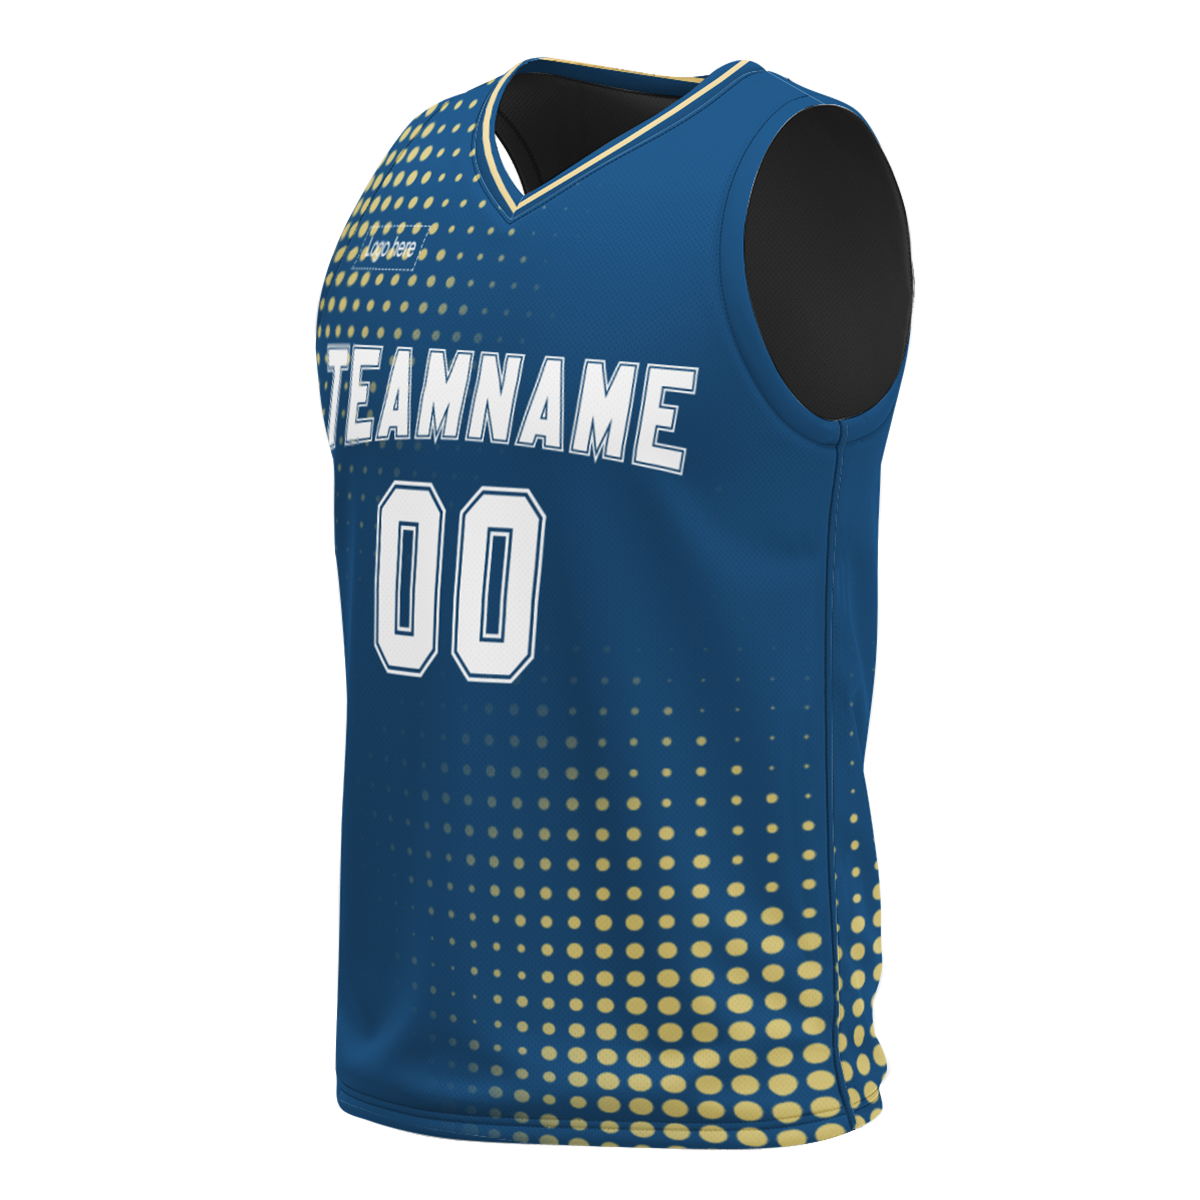 professional-customized-basketball-jersey-uniform-sets-print-on-demand-quick-dry-breathable-basketball-shirt-suits-at-cj-pod-5